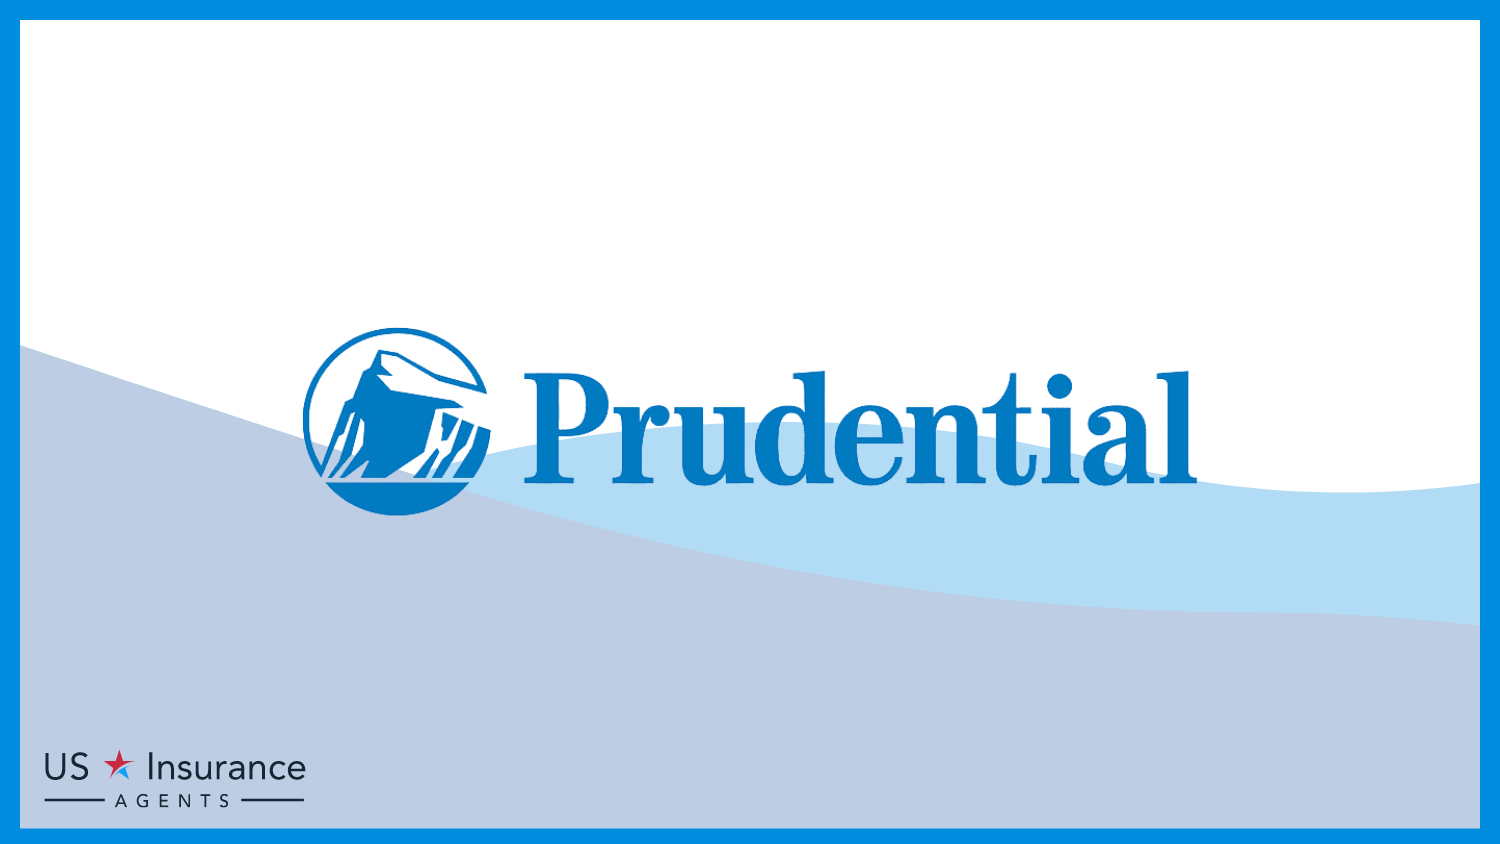 Prudential: Best Life Insurance for Missionaries